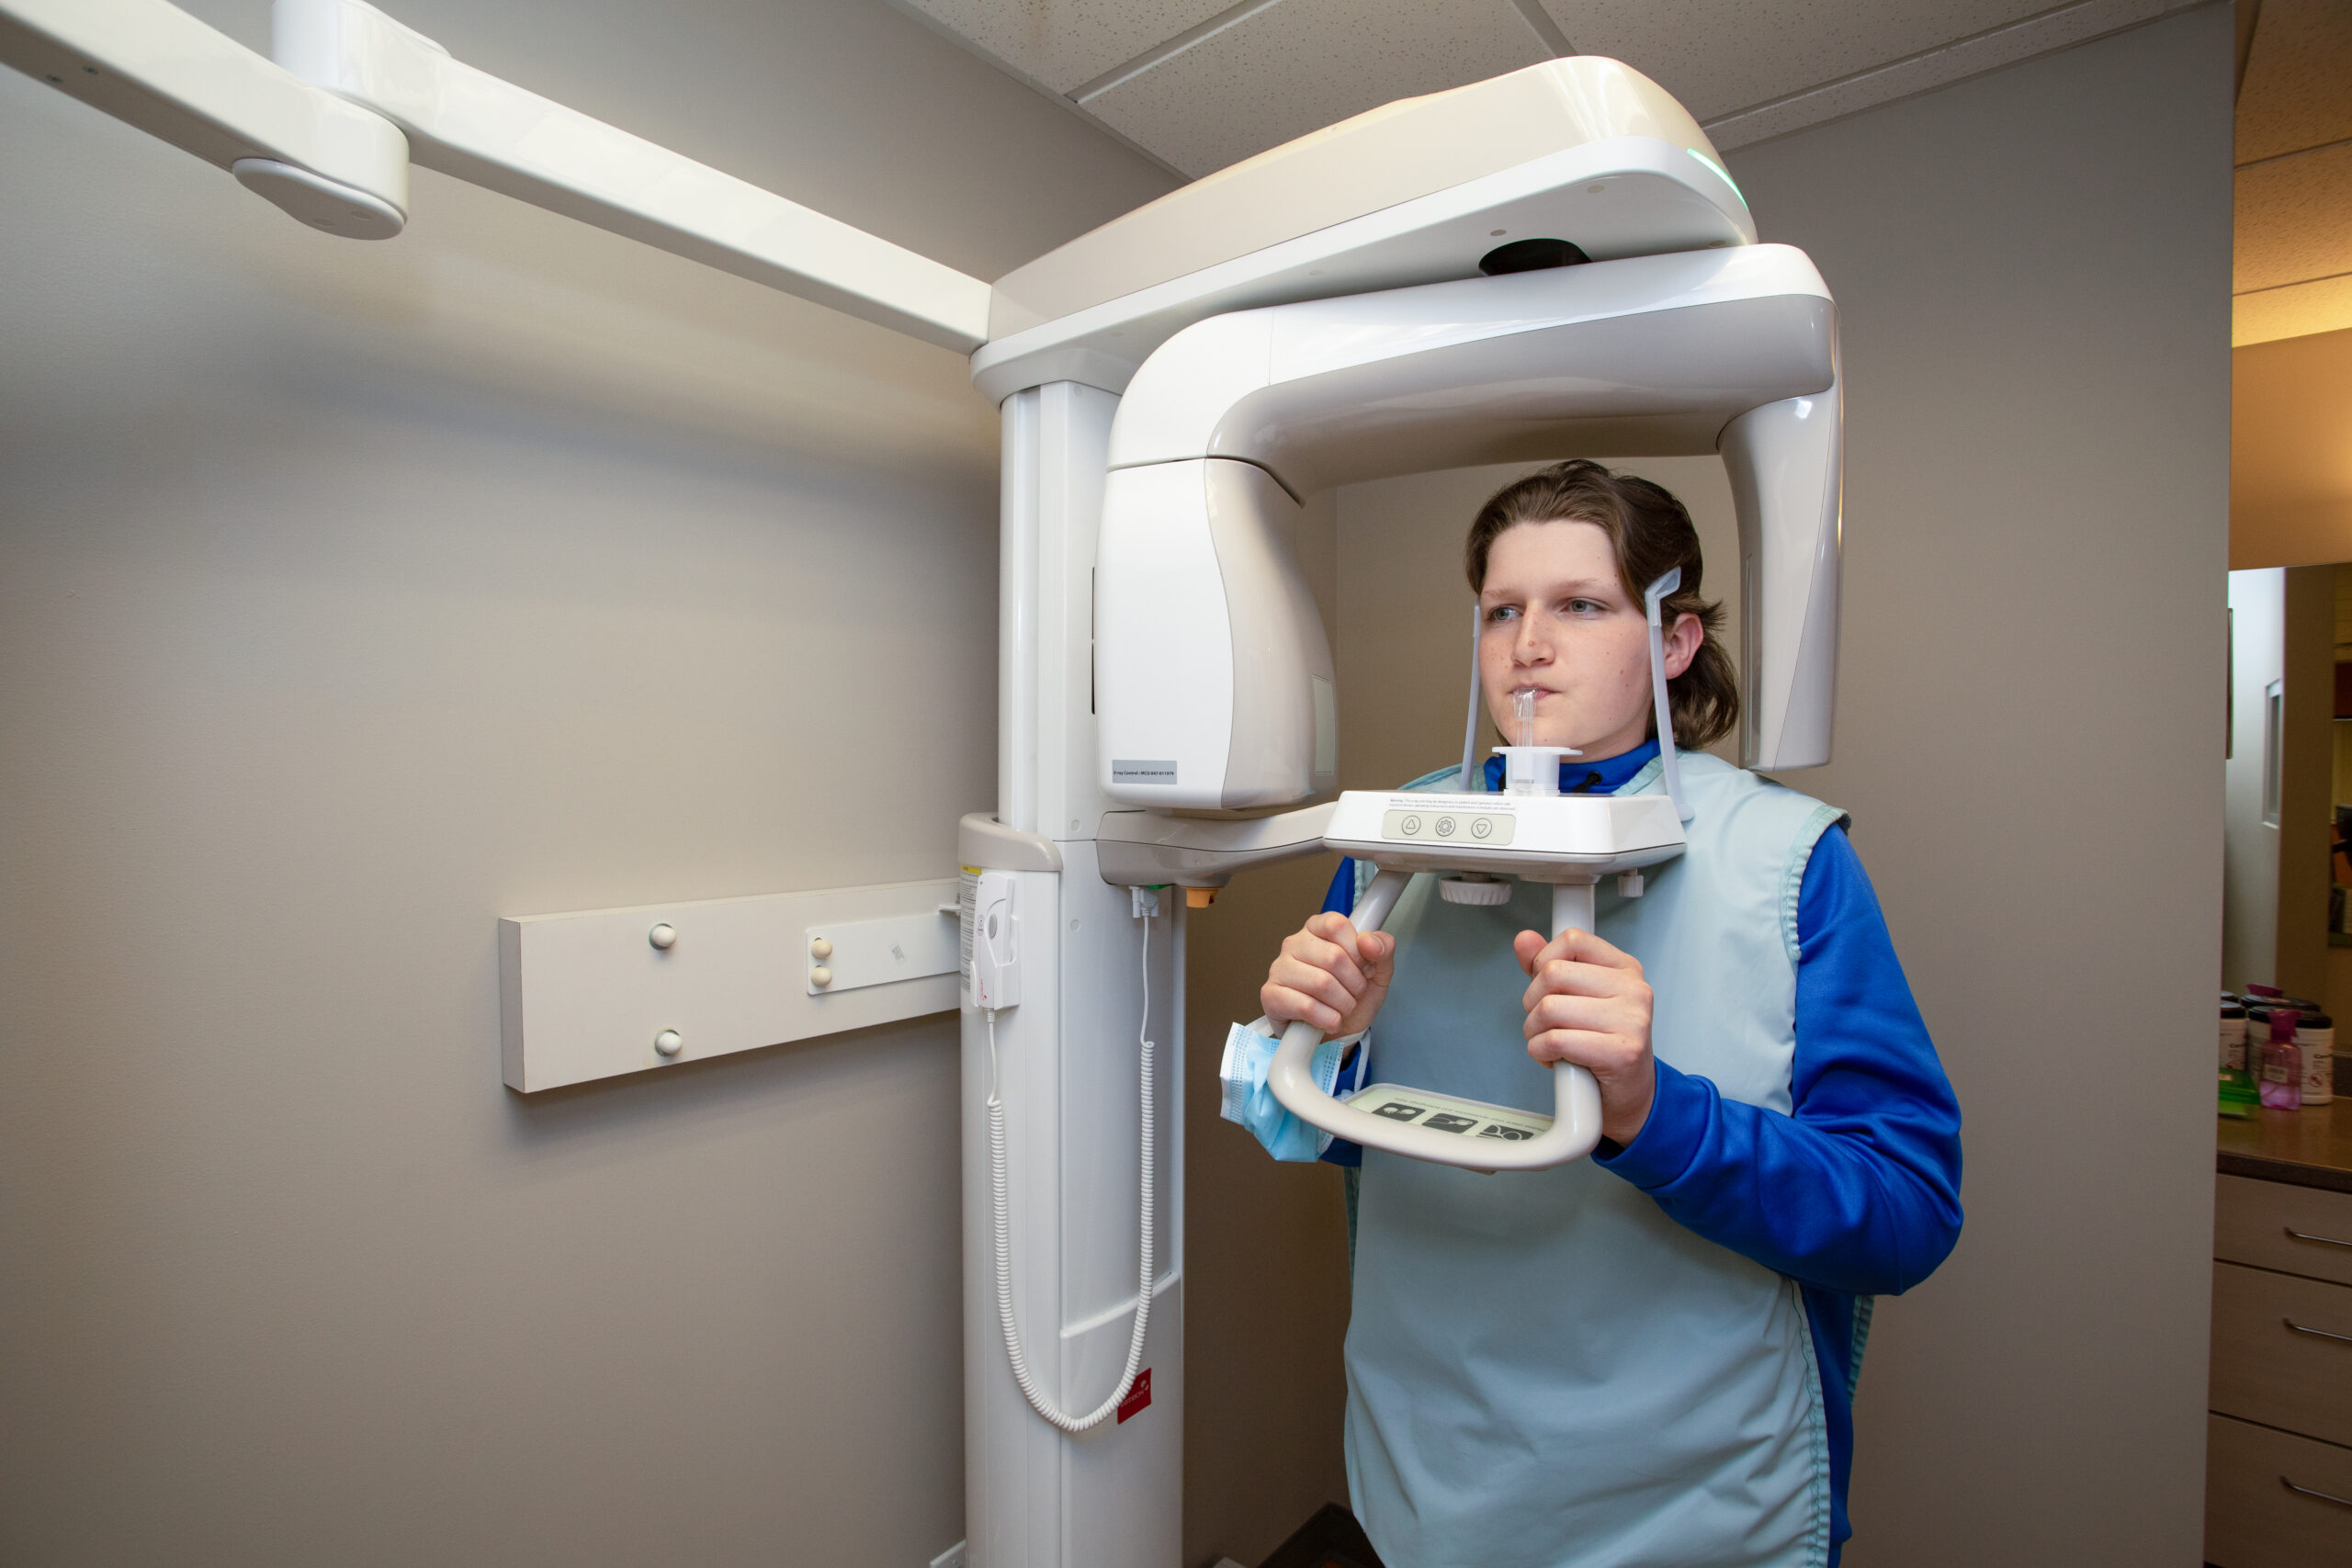 Why Do Orthodontists Use X-Rays?